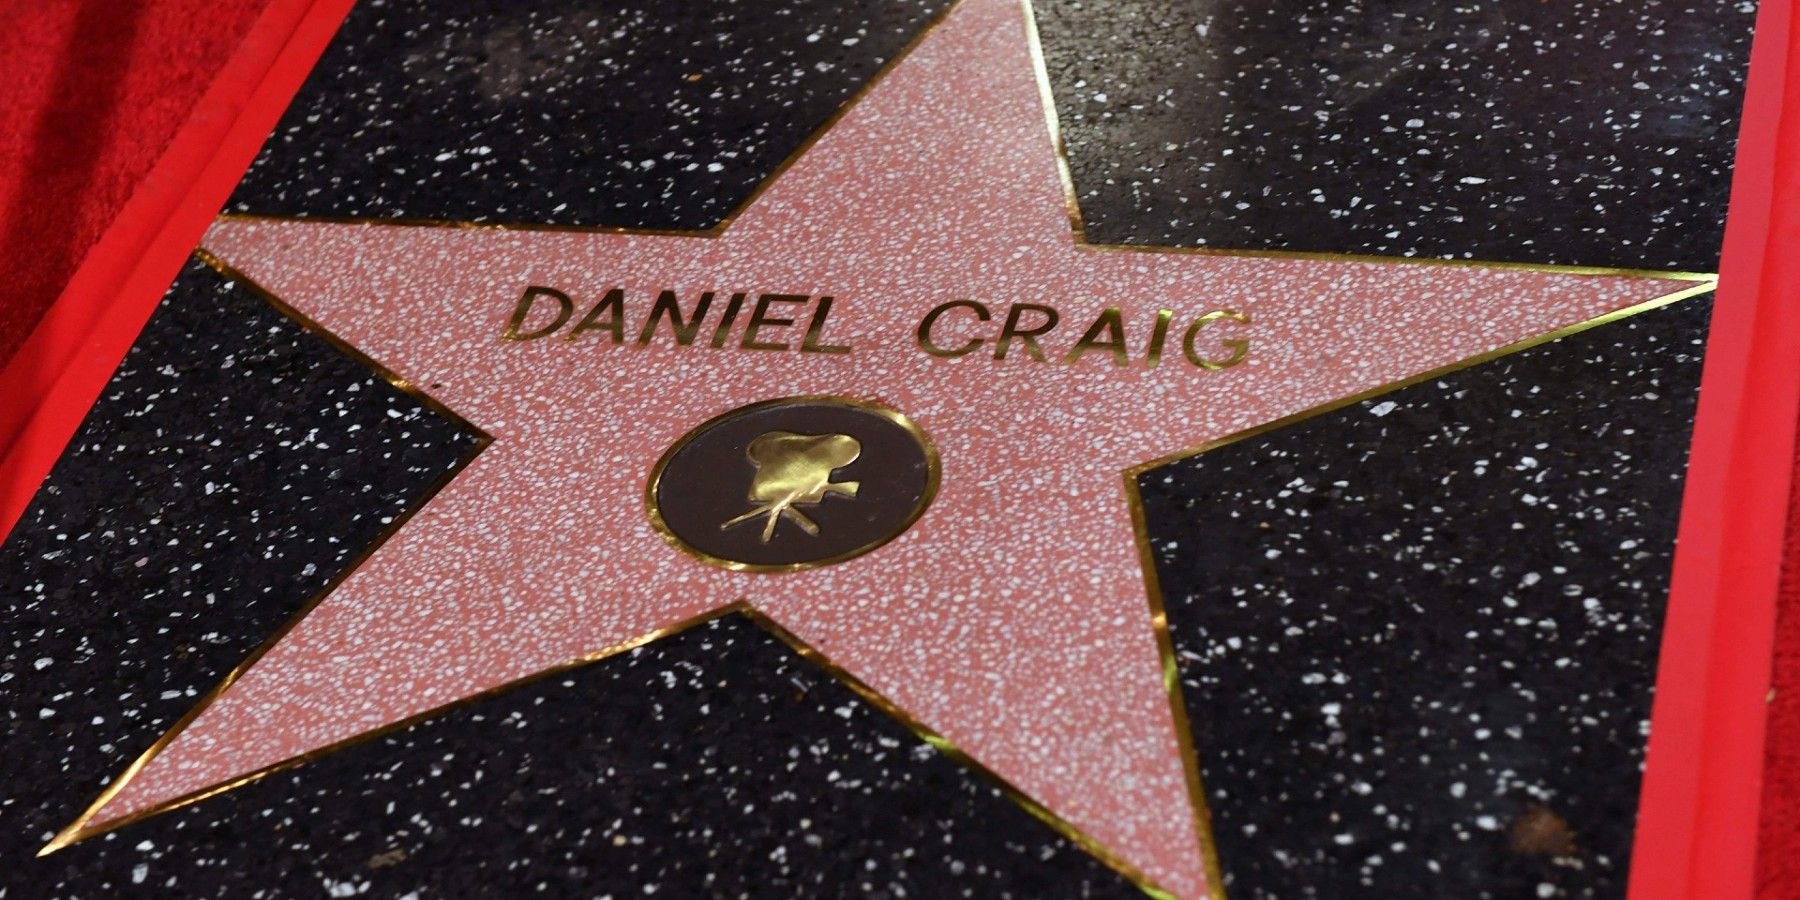 Daniel Craig's star on the Hollywood Walk of Fame